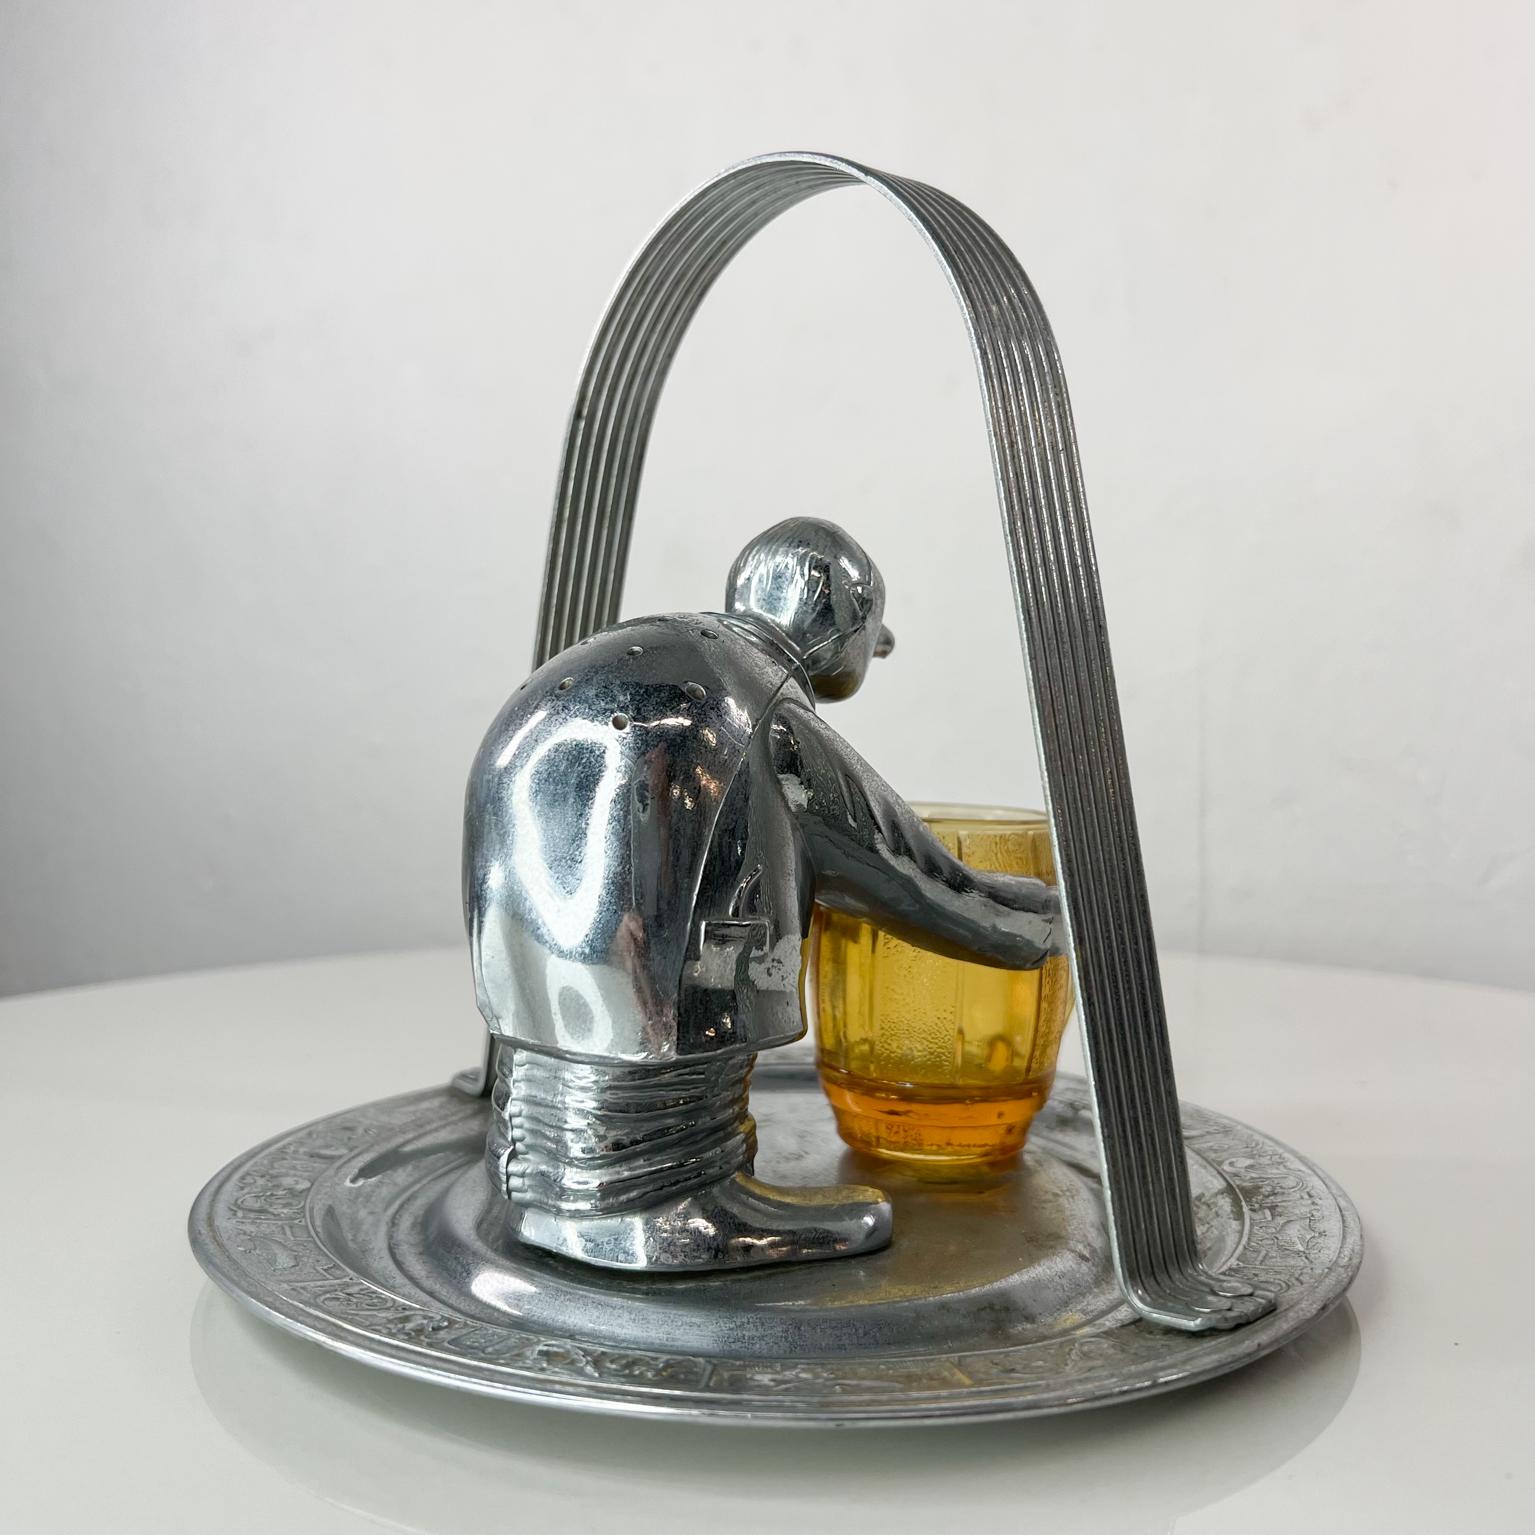 Mid-Century Modern butler Party Condiment serving dish chrome plate National Silver Company
Butler has slots on his back for toothpicks 
N S Co Chrome Plate maker stamp present
Measures: 9.63 diameter x 7.25 tall
Original unrestored vintage